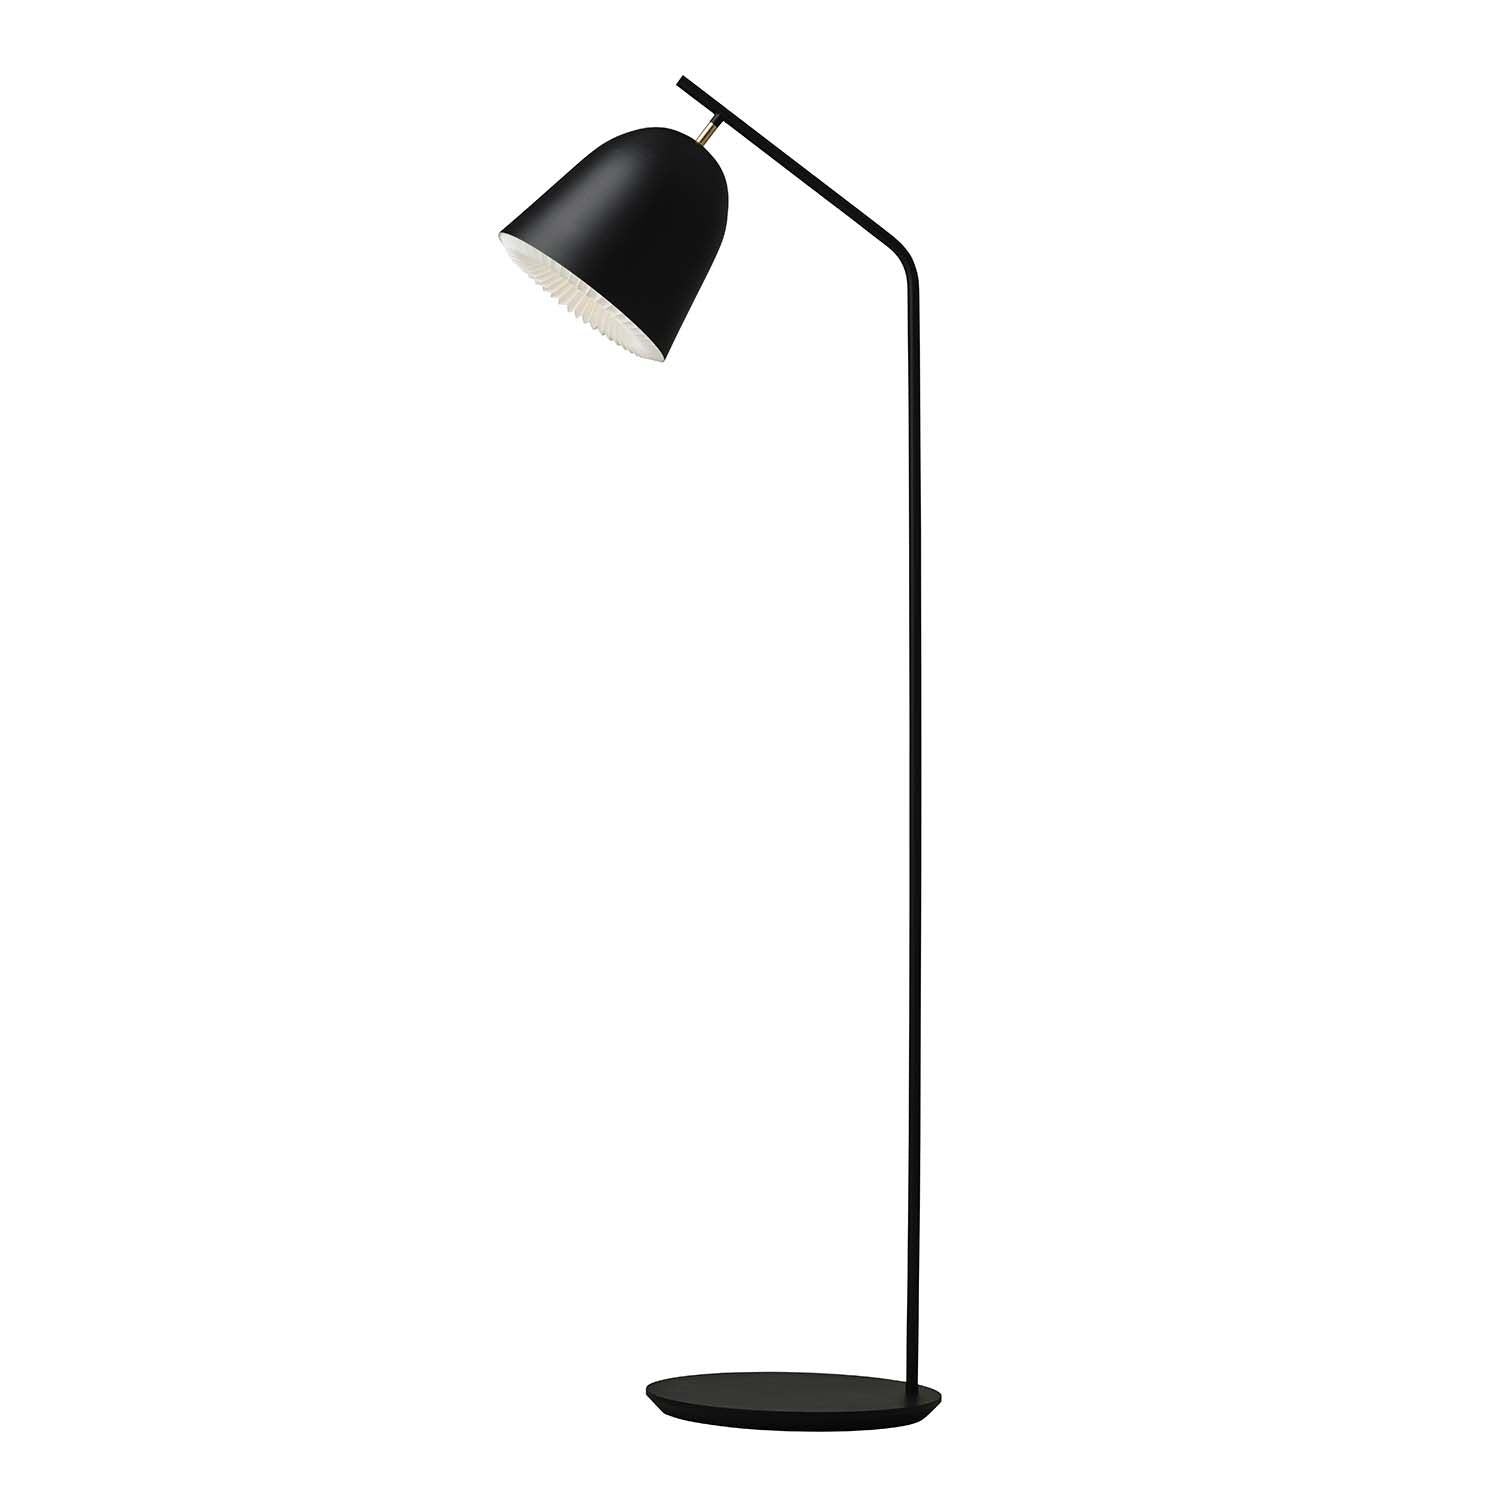 CACHÉ - Black floor lamp with pleated paper lampshade in designer living room